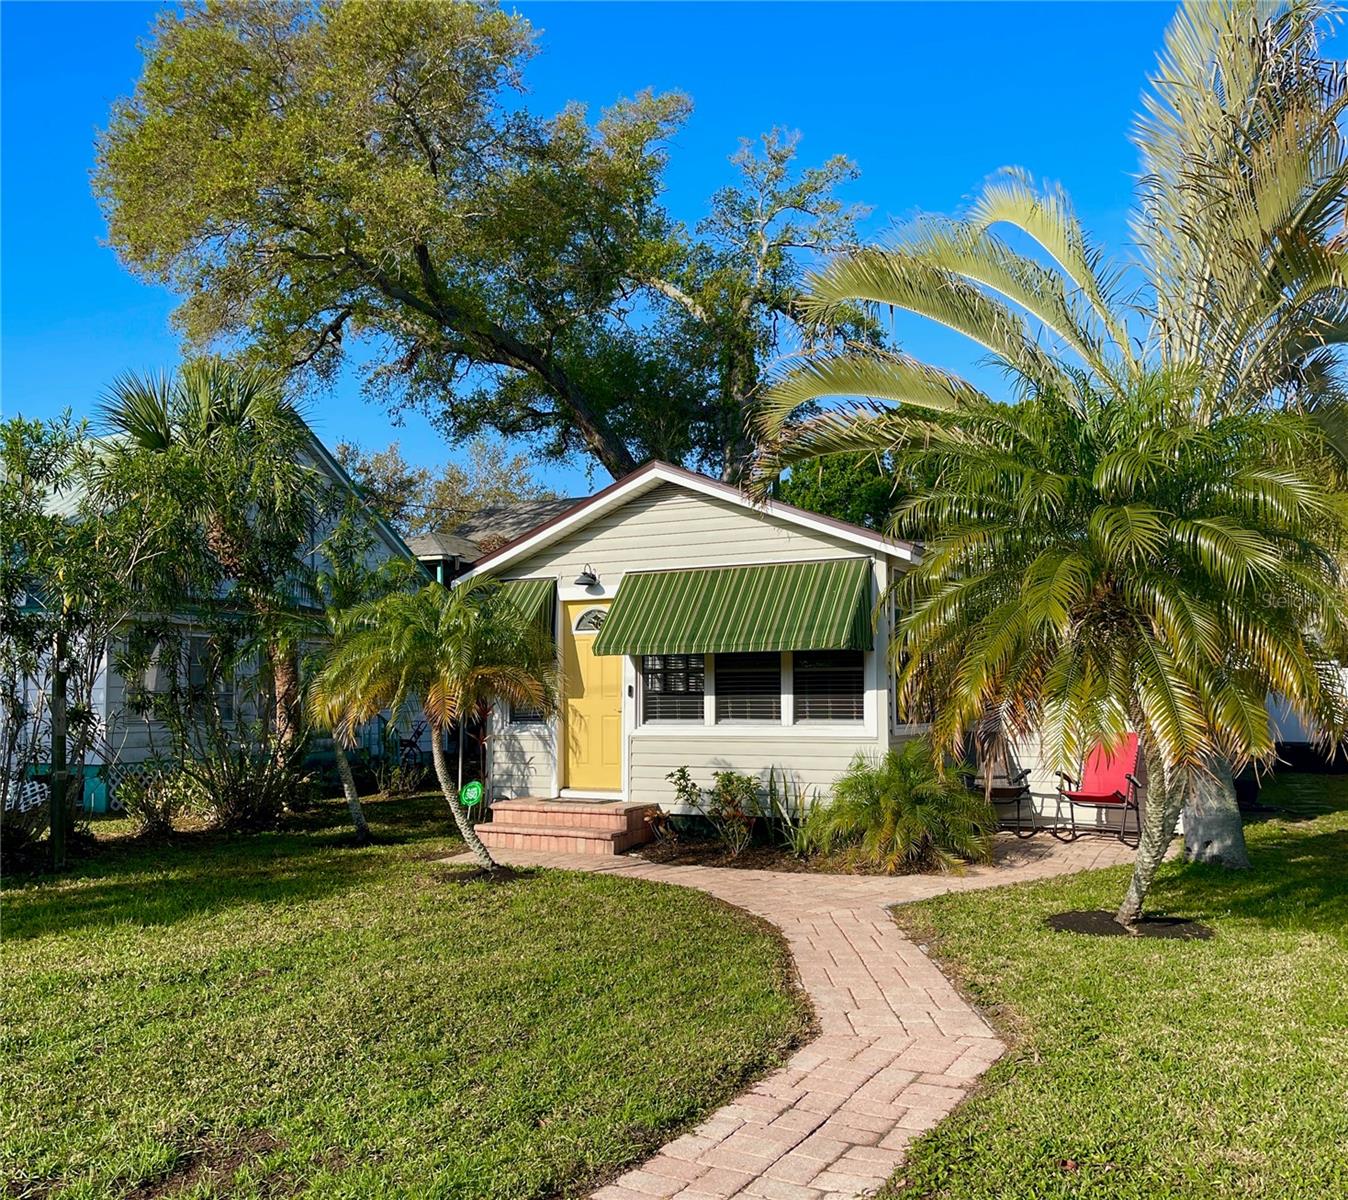 Sweet & cozy this little Gulfport beach cottage will bring you much joy over the years! Just bring your flip flops, beach towel and sunglasses and live the easy breezy Gulfport salt life today!